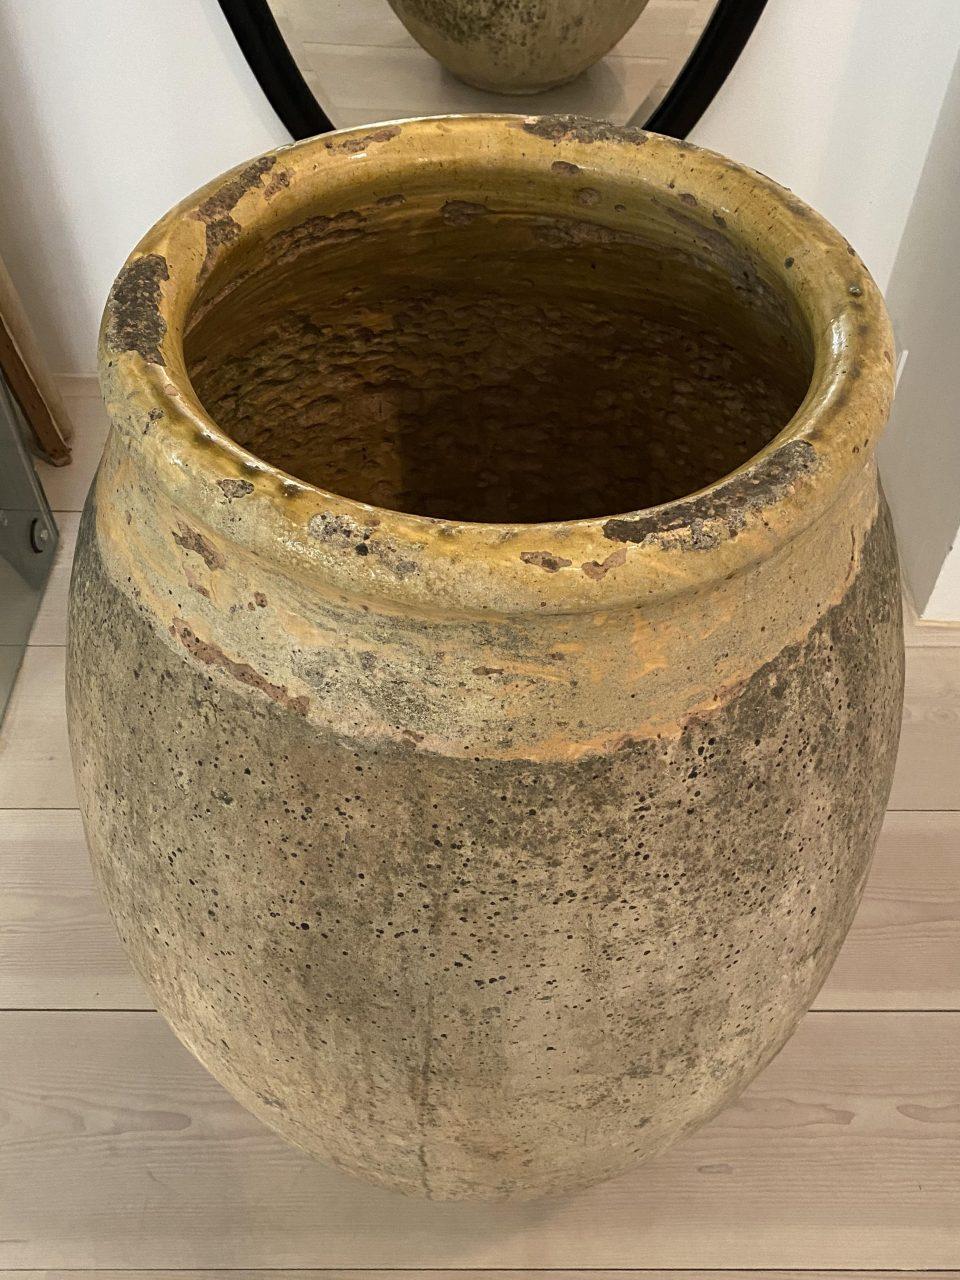 Magnificent and much coveted gigantic antique pottery holder, pre-1900s.

A unique piece of handmade ceramic craftsmanship, made in the cozy southern French city of Biot, located between Nice and Cannes. The city of Biot has had a tradition of